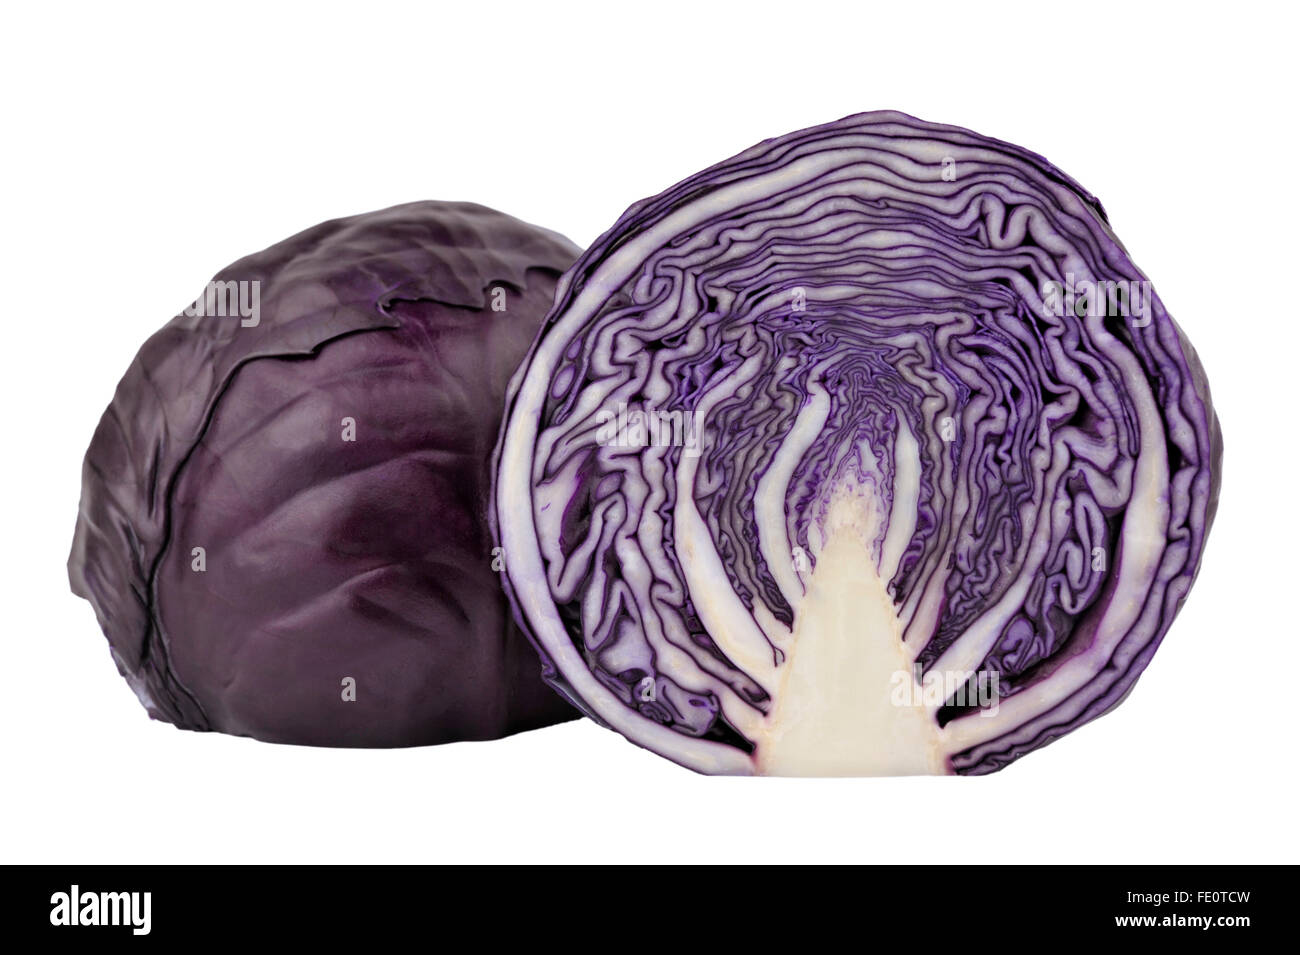 Red or purple cabbage also known as red kraut or blue kraut. Stock Photo